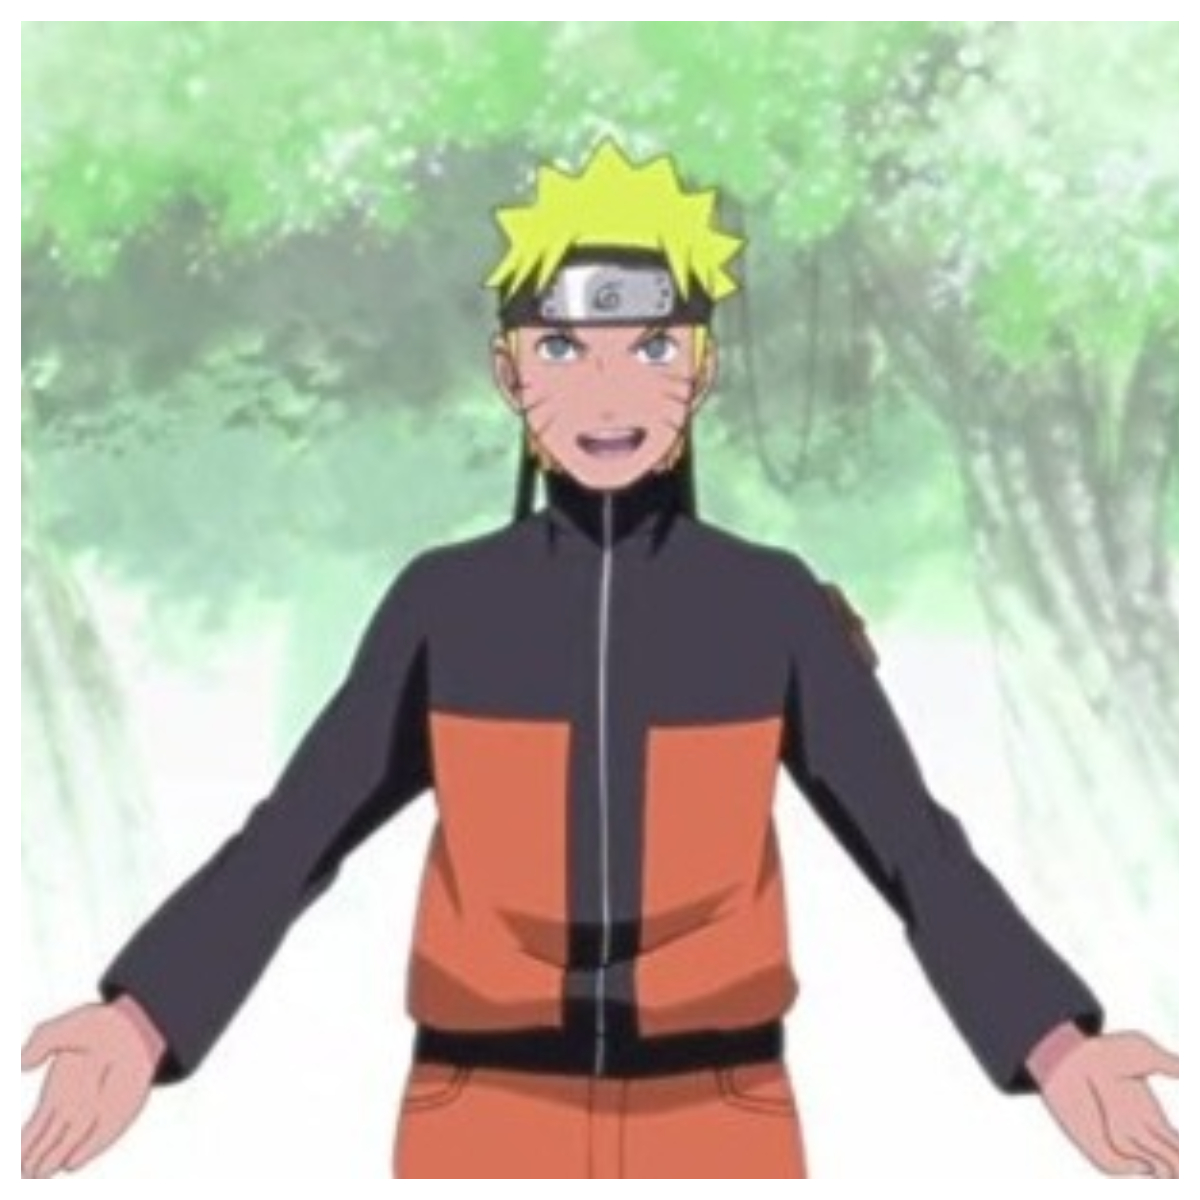 10 most popular Naruto hand signs and what they represent